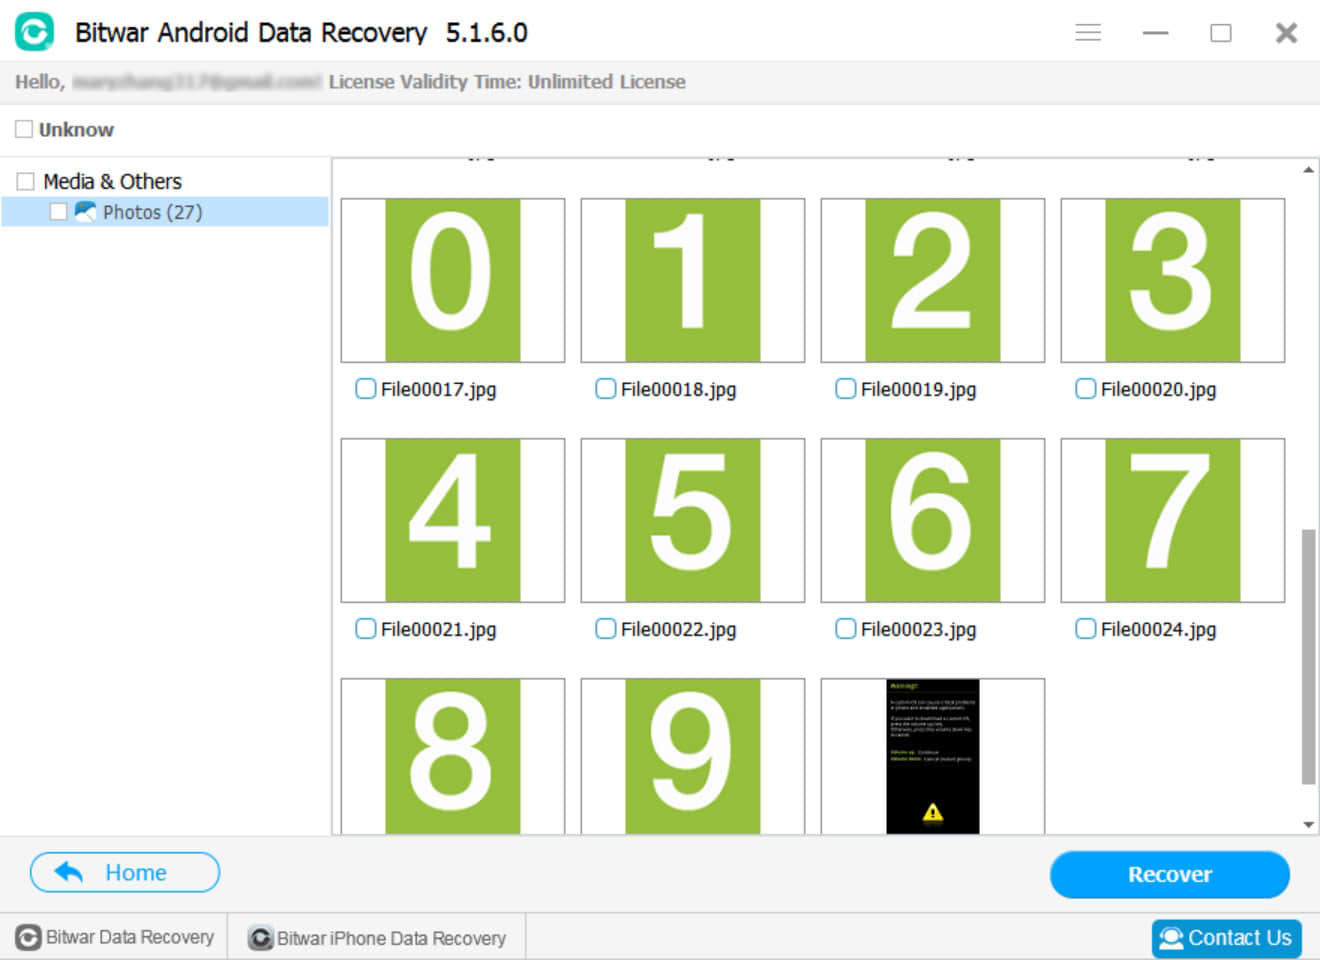 2.Bitwar Android Data Recovery -photo recovery